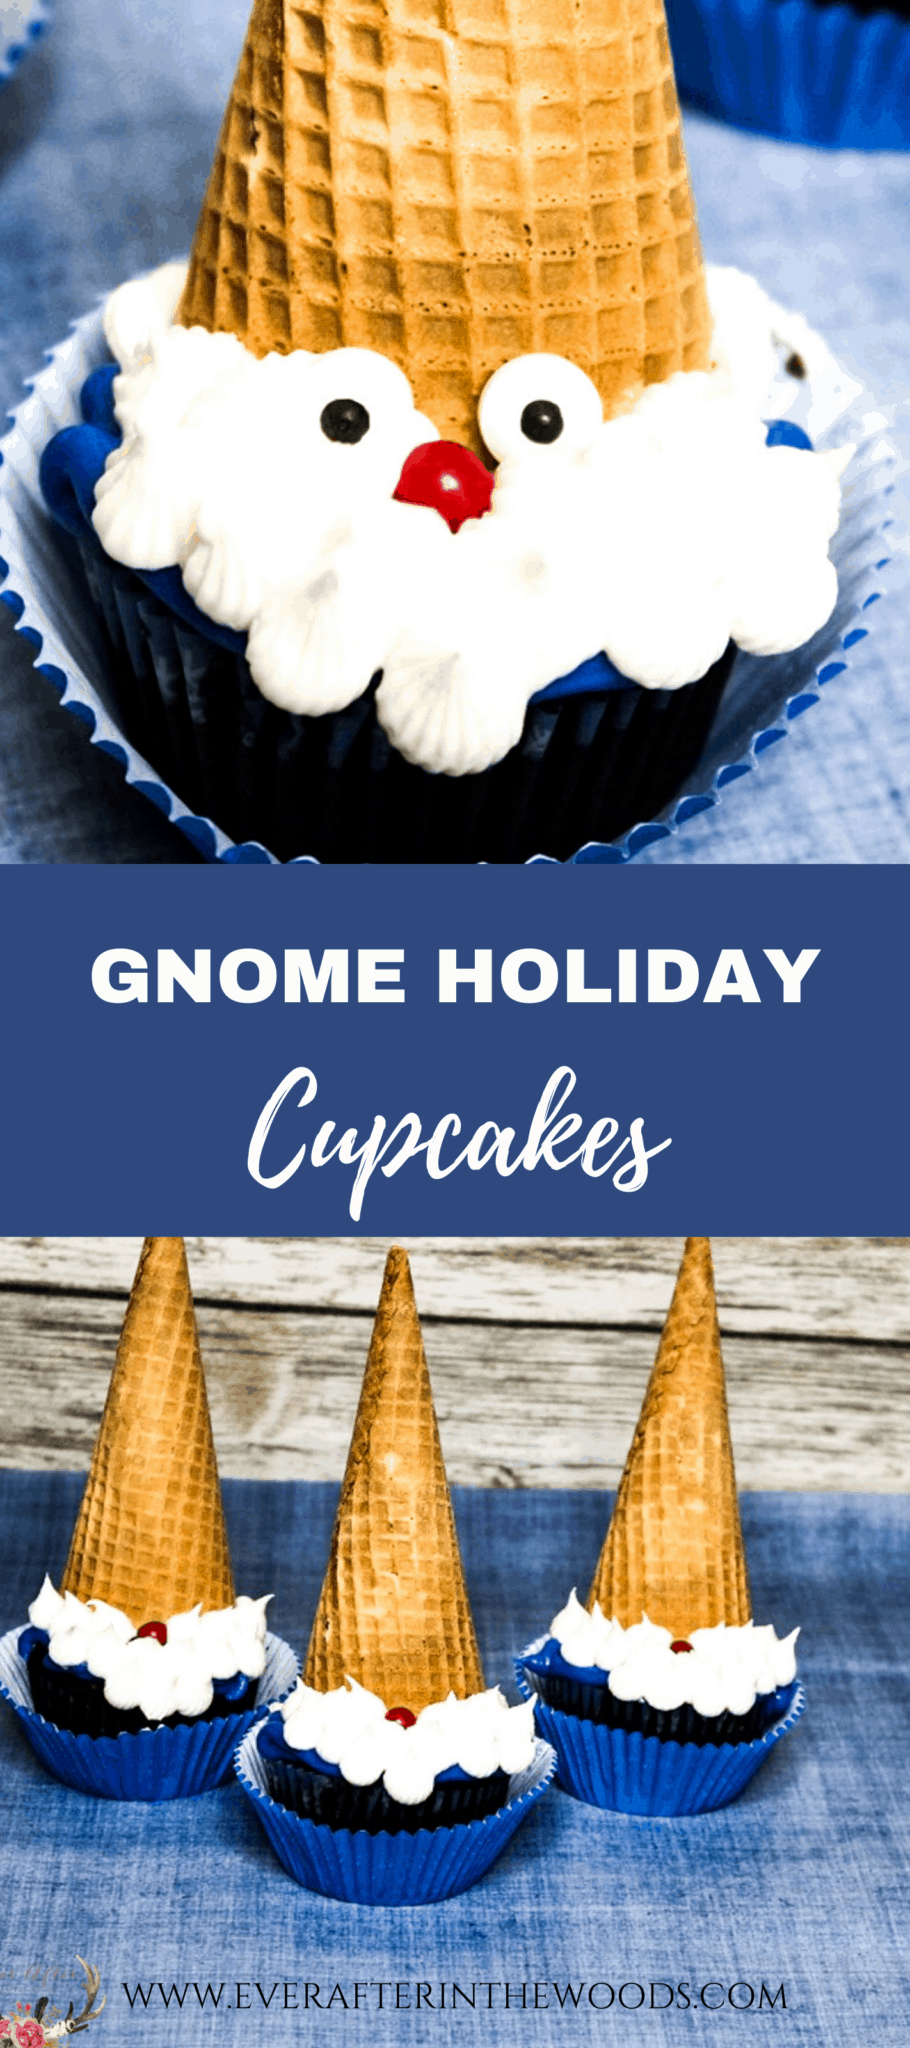 Cute Gnome Holiday Cupcakes - Ever After in the Woods